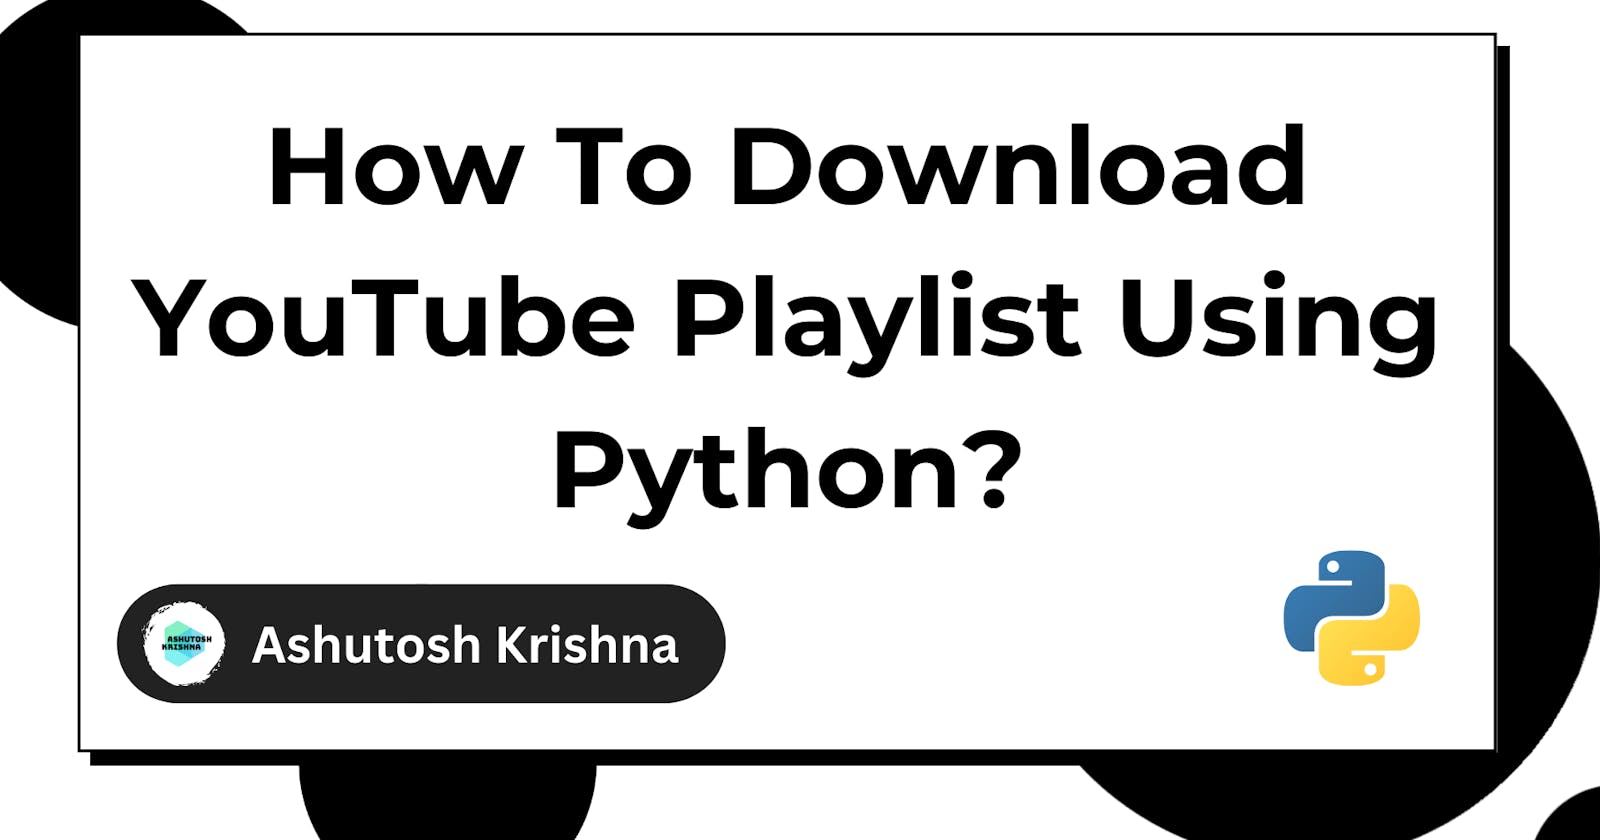 How To Download YouTube Playlist Using Python